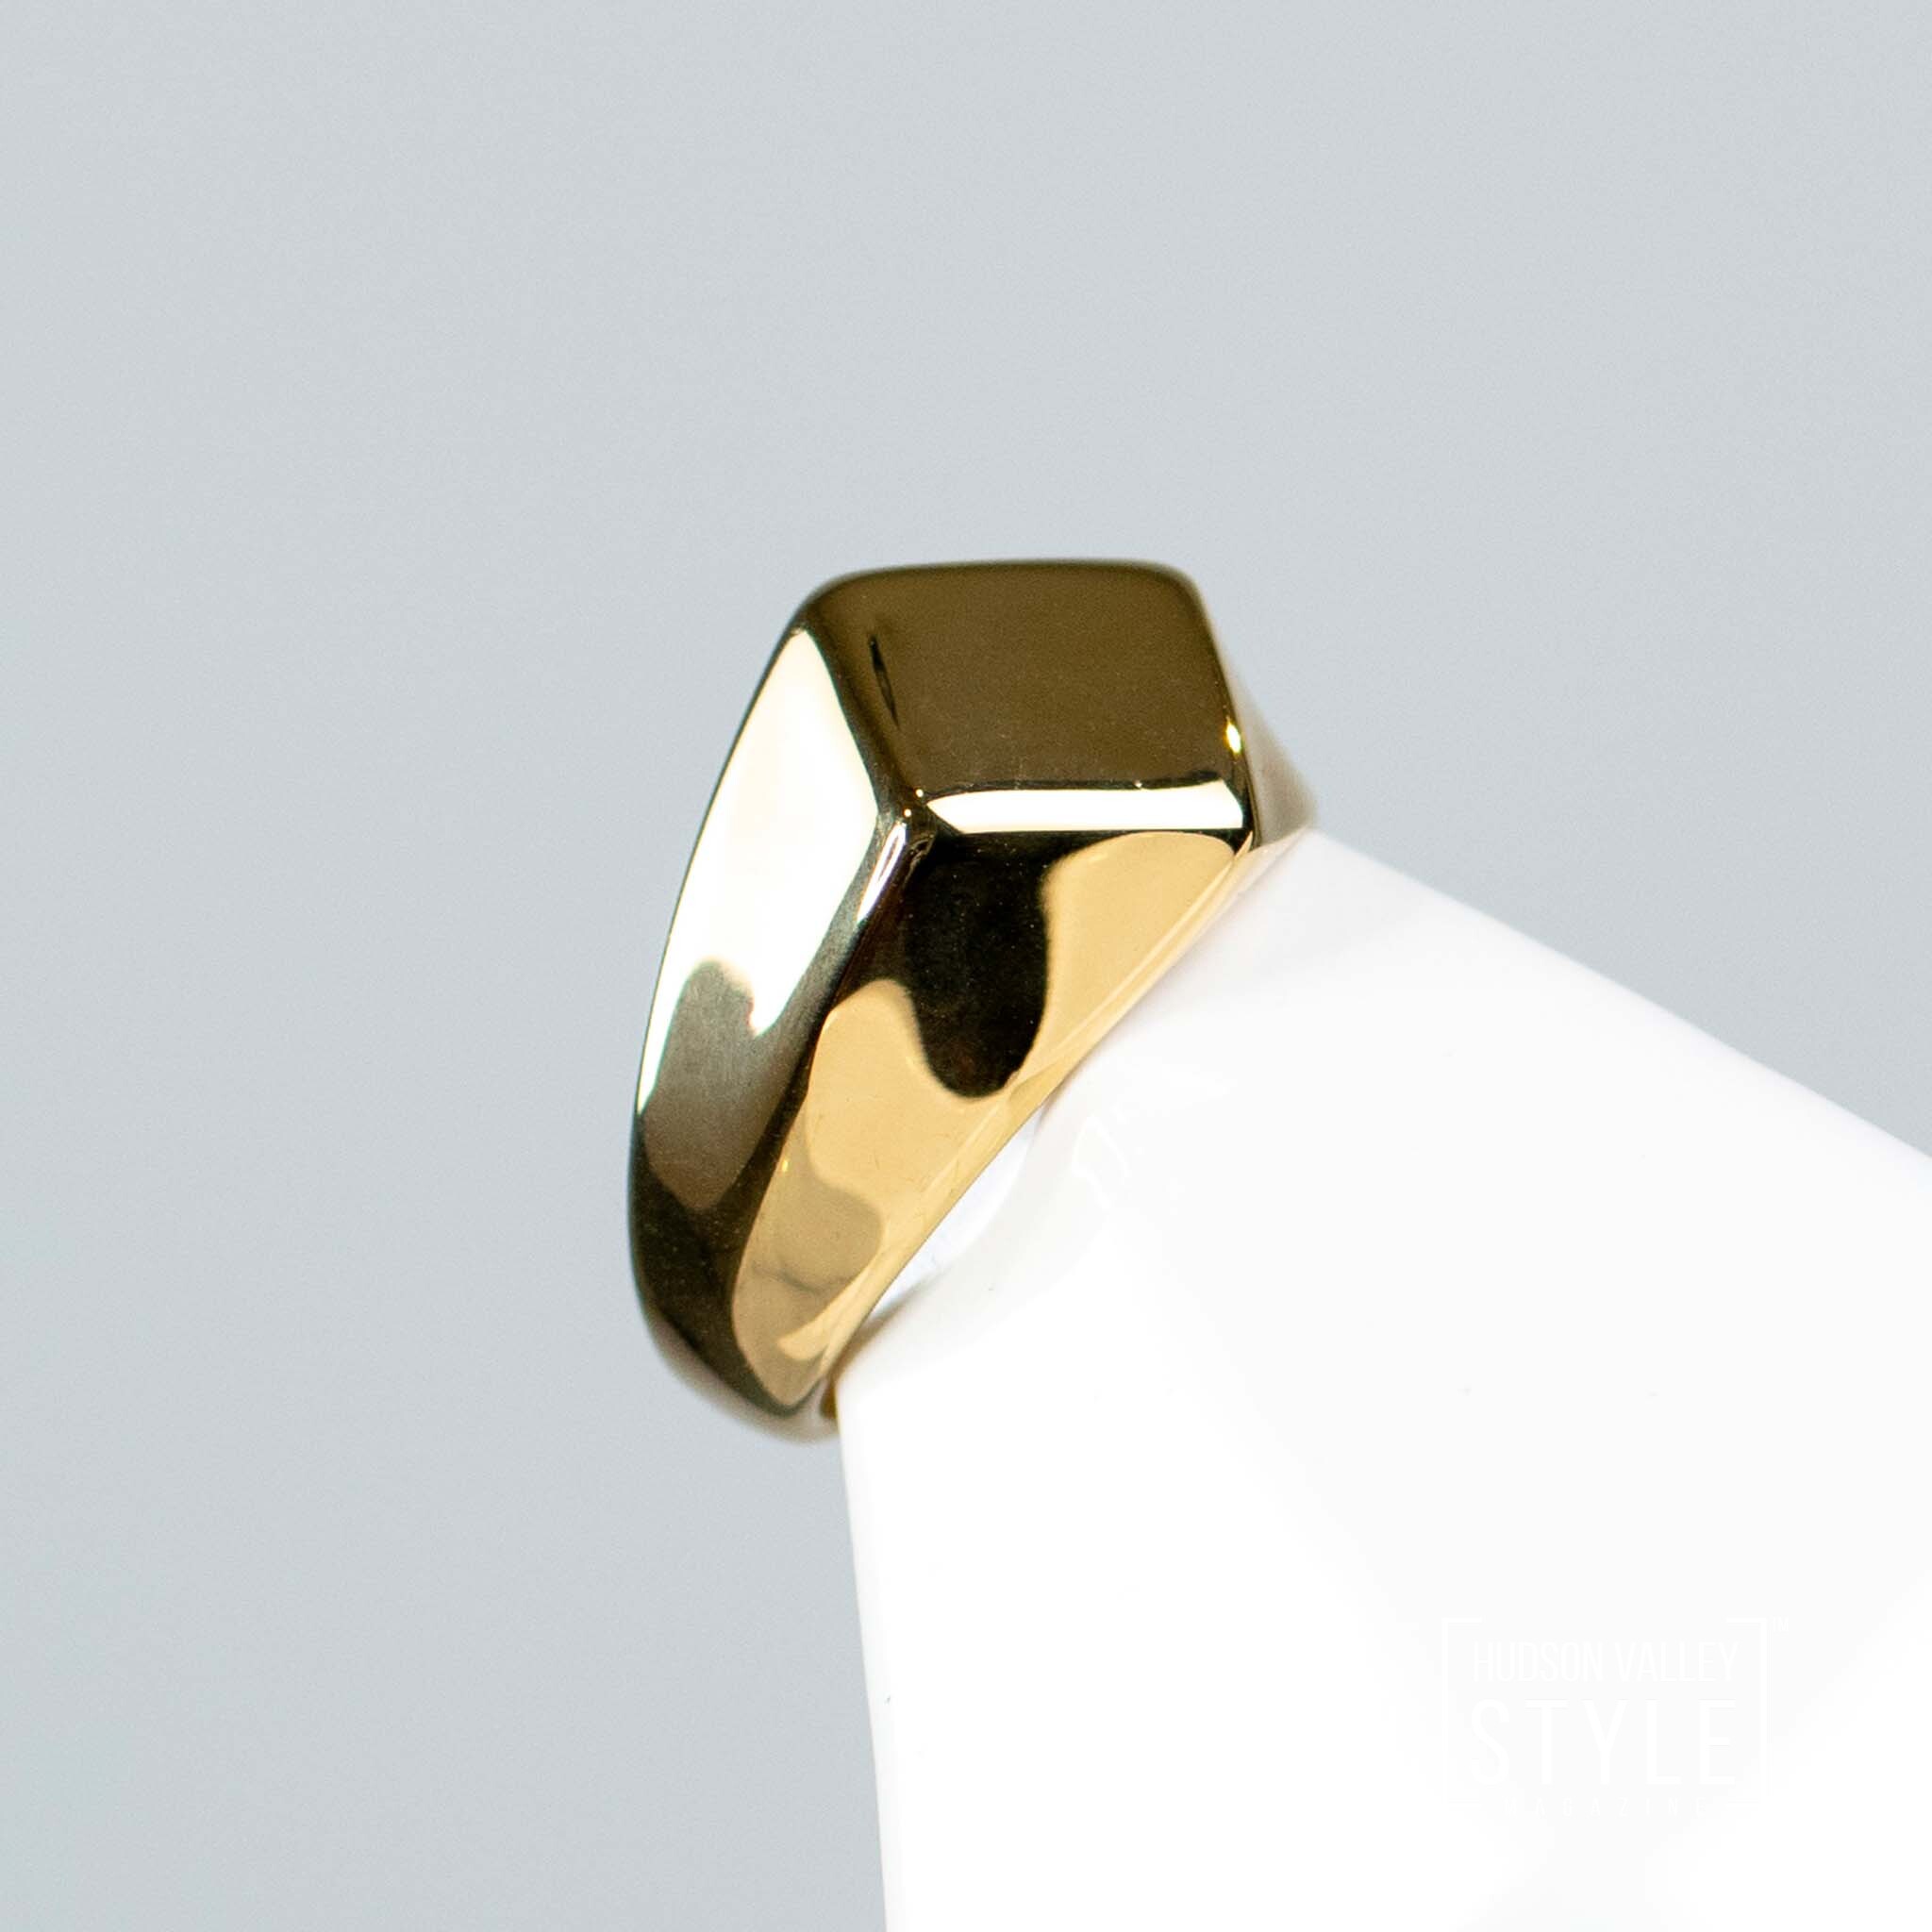 Men's Royal Gold Diamond Steel Ring - Men's Holiday Gift Ideas - Men's Fashion Accessories by HARD NEW YORK - 2021 Holiday Gift Guide